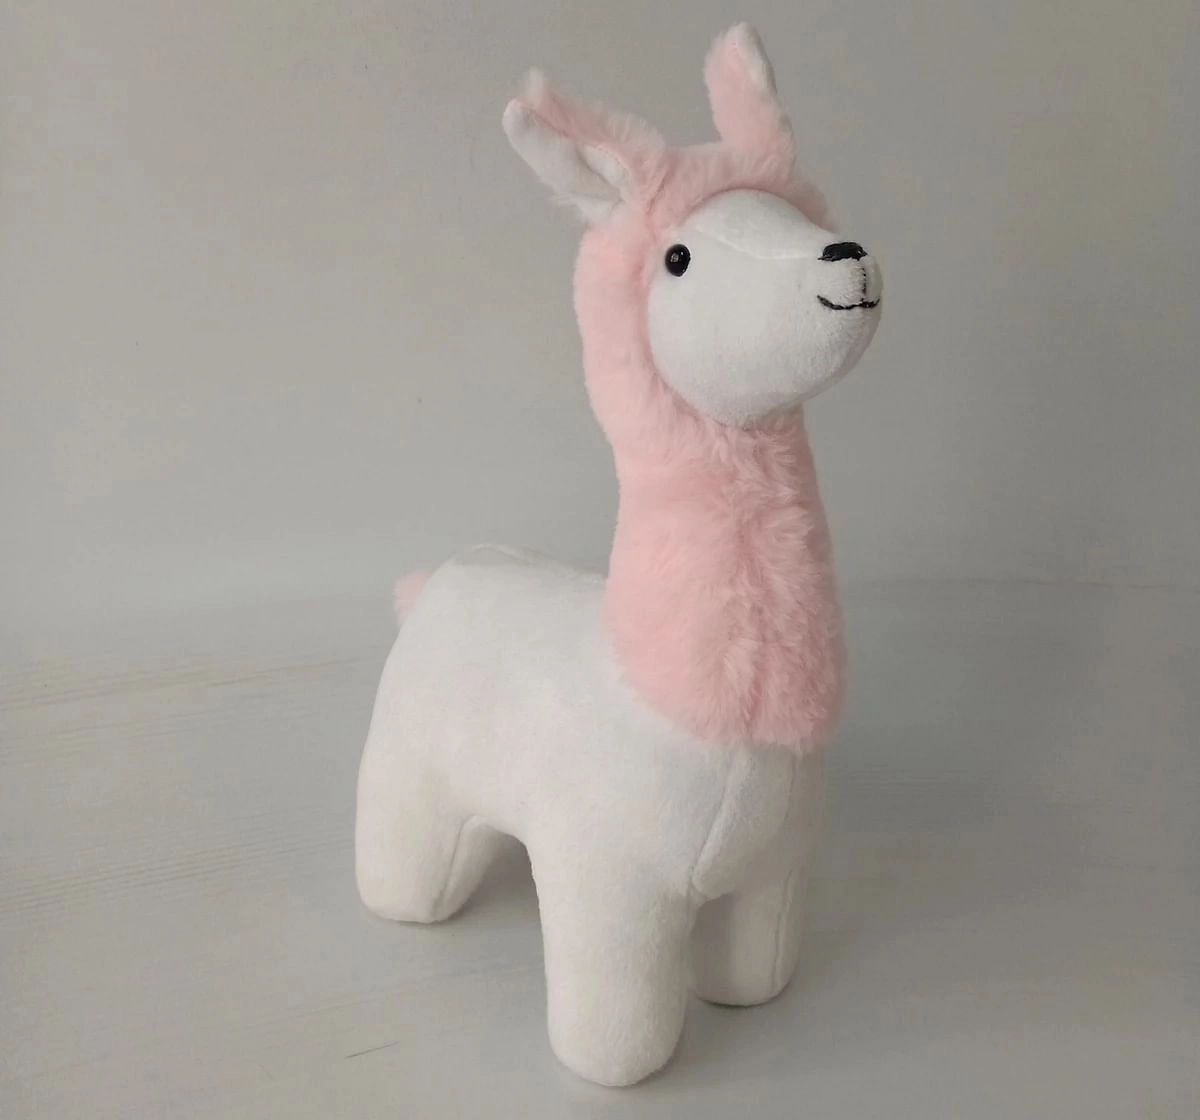 Furrendz Perky Pink Llama 10" Plush for 1 Year and Above